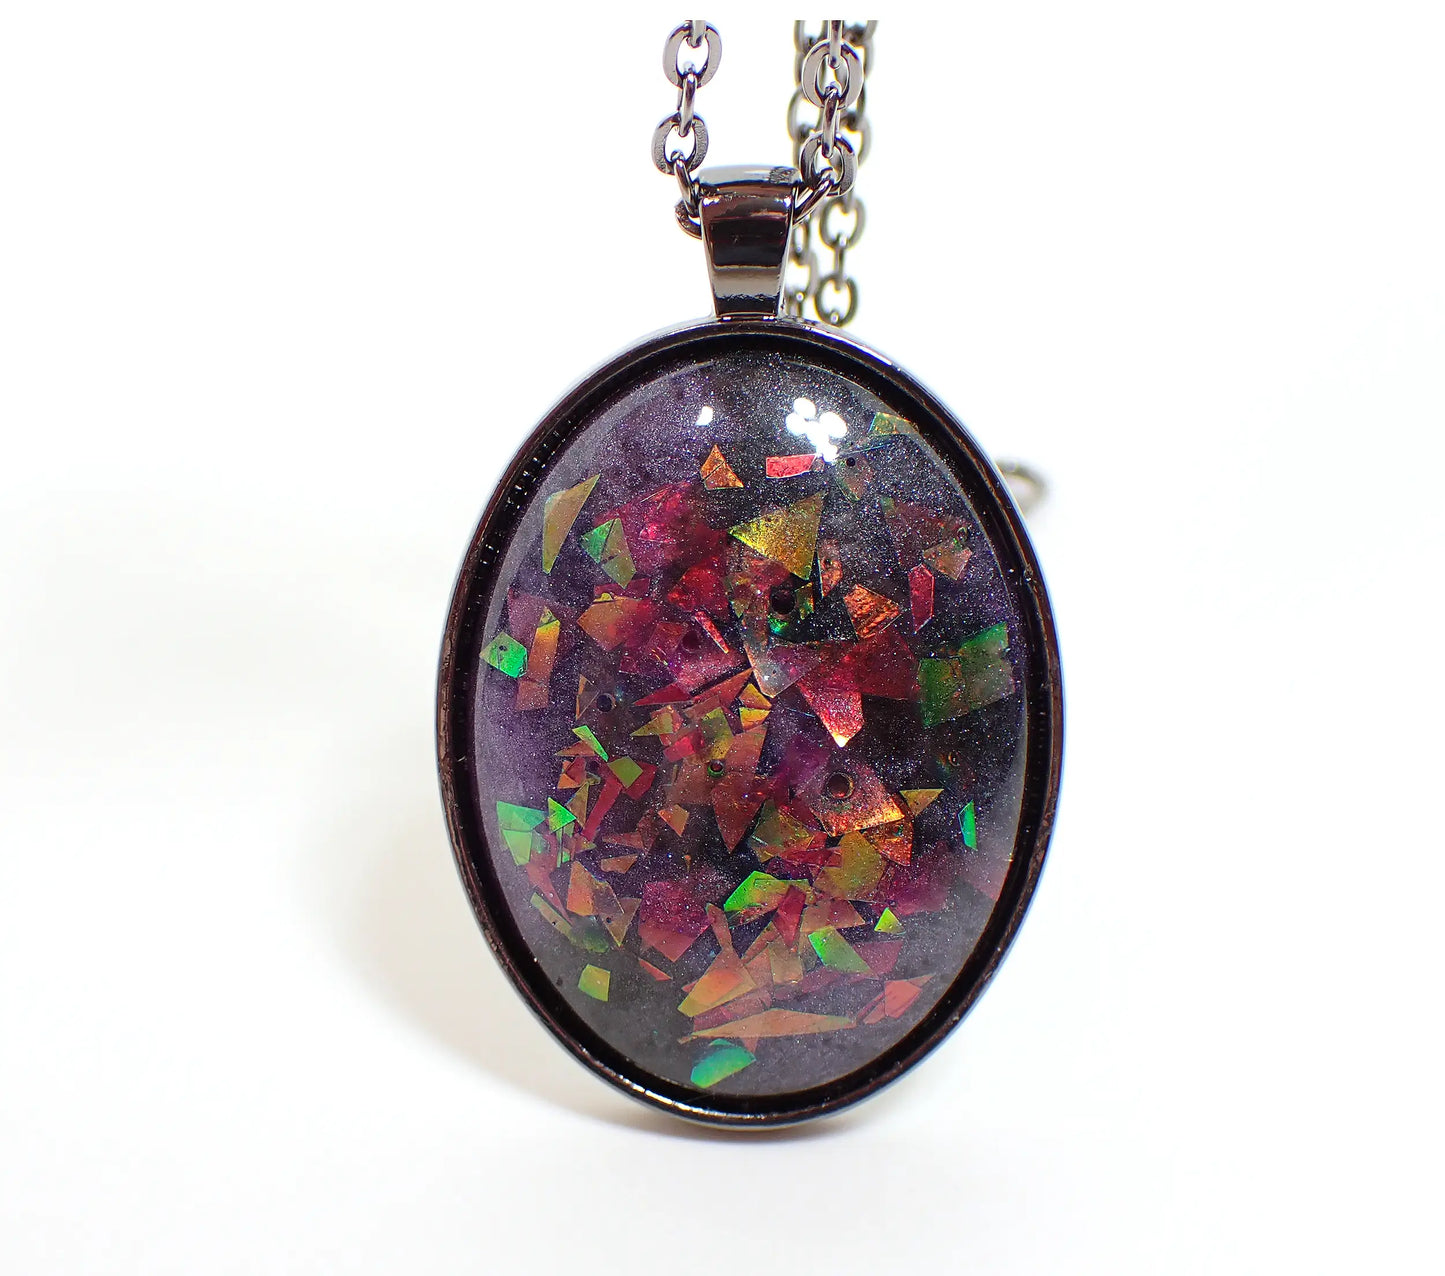 Large Oval Handmade Purple Resin Pendant Necklace with Iridescent Glitter, Gunmetal Plated